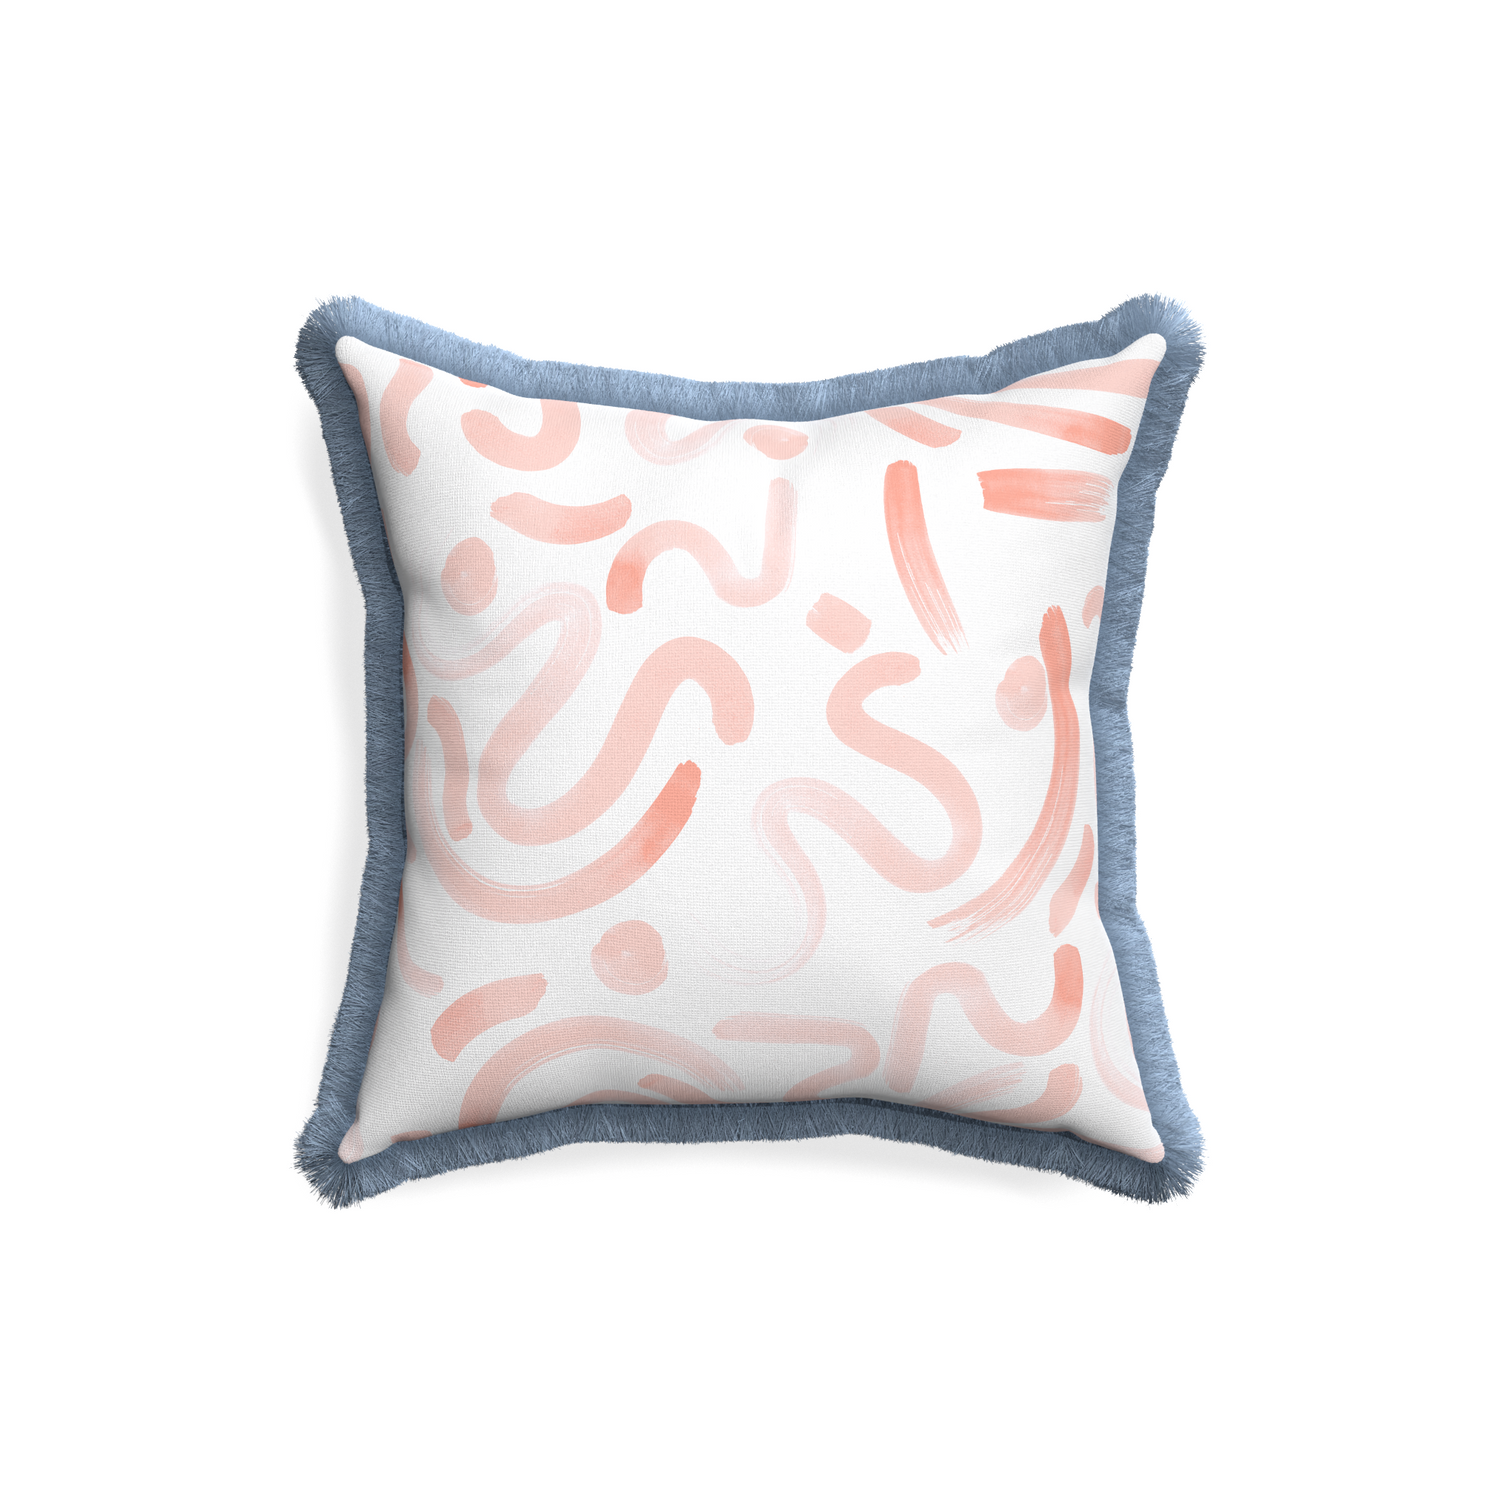 18-square hockney pink custom pink graphicpillow with sky fringe on white background